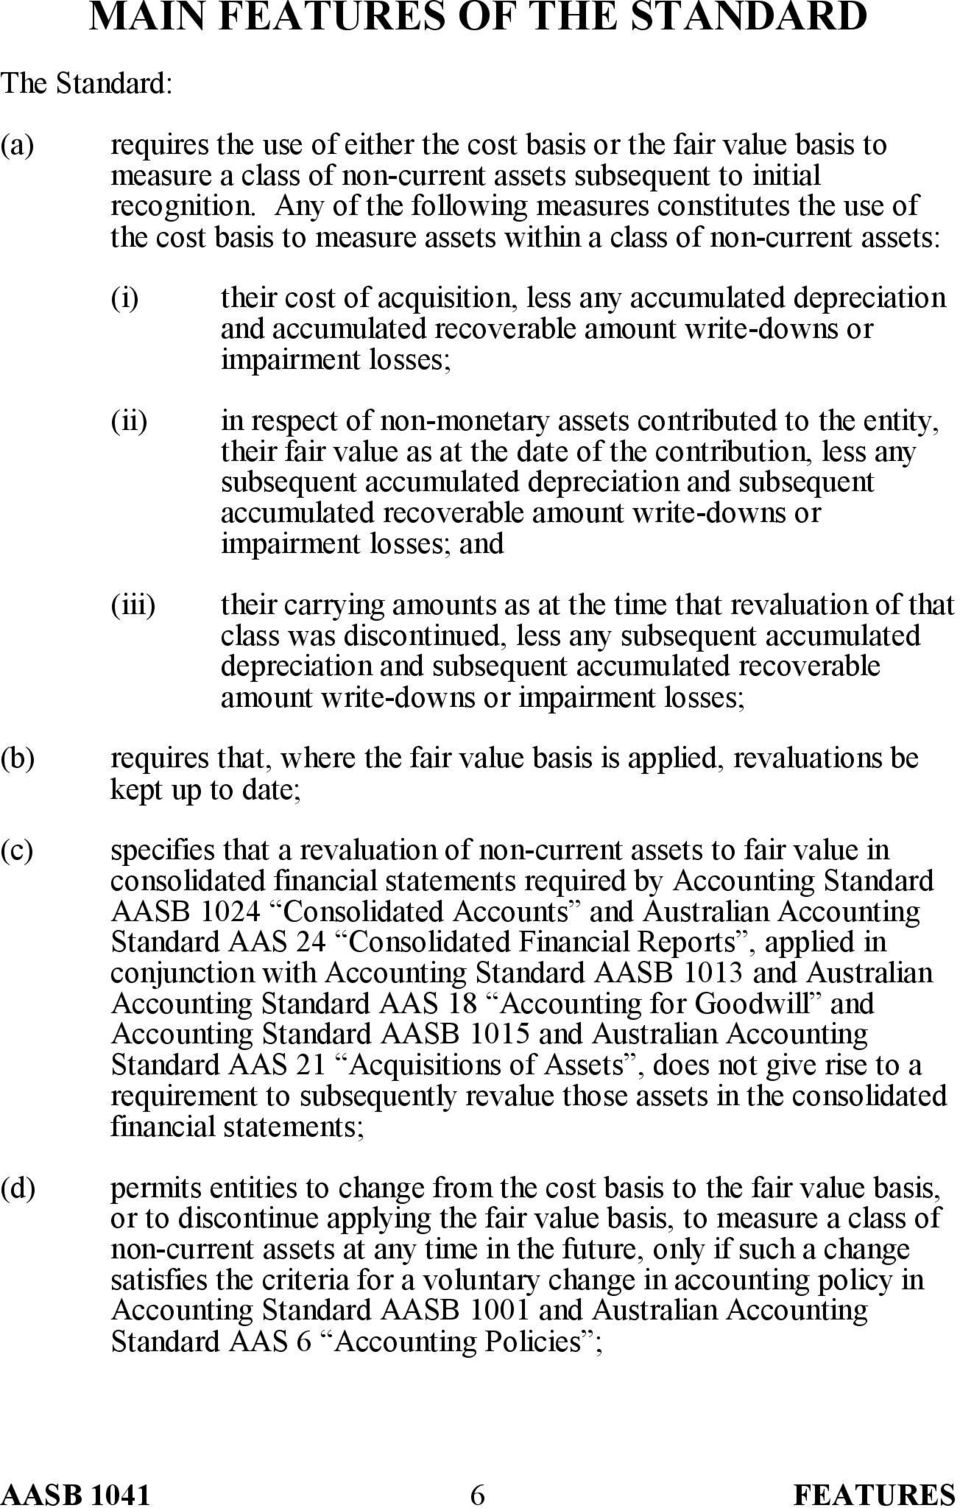 and accumulated recoverable amount write-downs or impairment losses; in respect of non-monetary assets contributed to the entity, their fair value as at the date of the contribution, less any